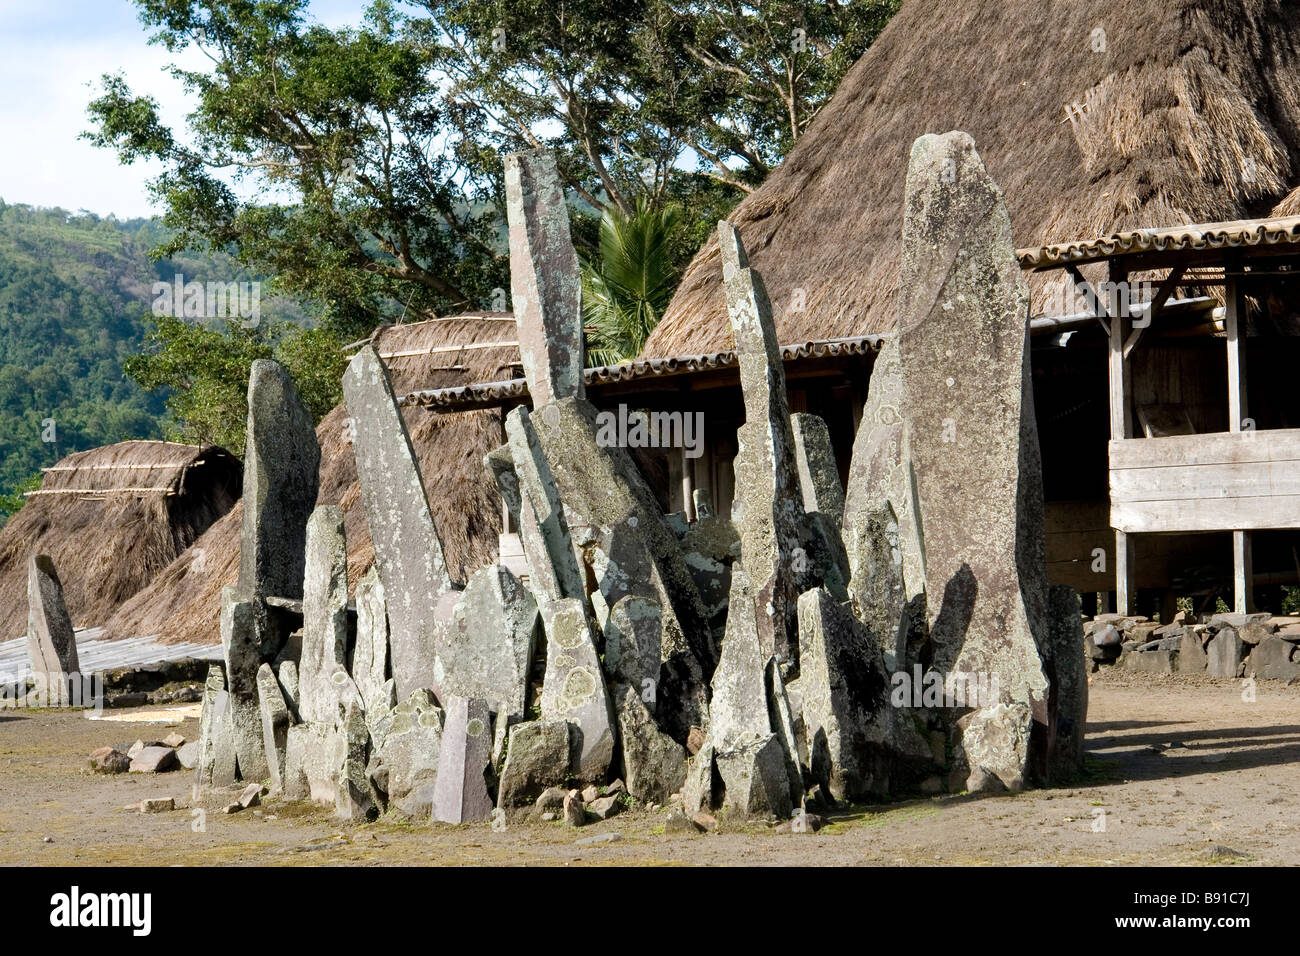 Megaliths in Bena, the most traditional Ngada village (Flores - Indonesia). Mégalithes à Bena, village traditionnel Ngada. Stock Photo